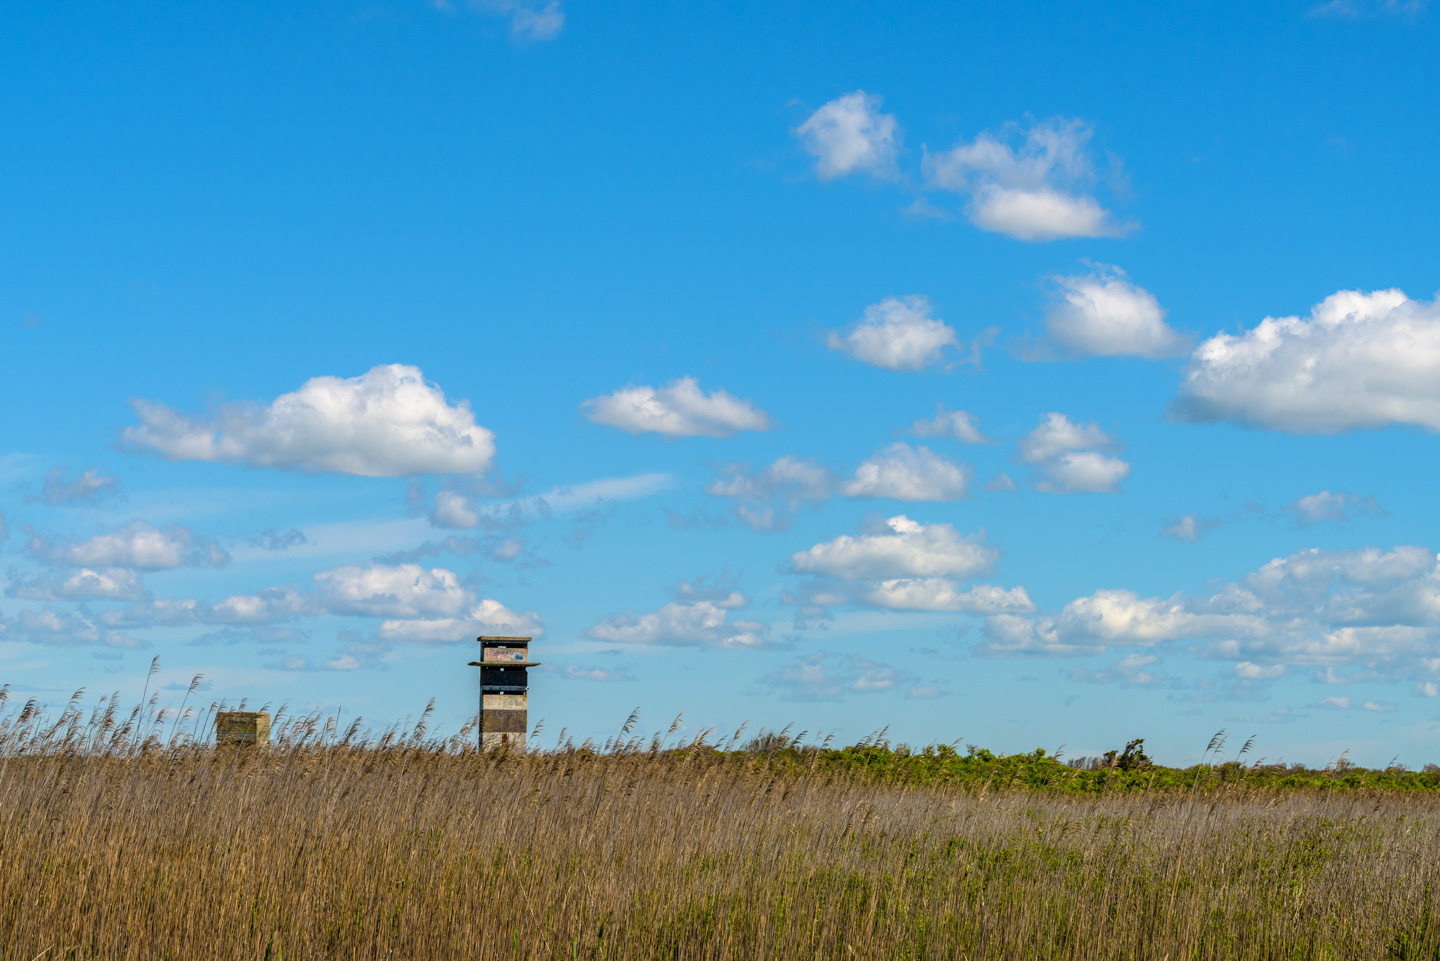 Gooseberry Island WWII Outlook Towers from a distance